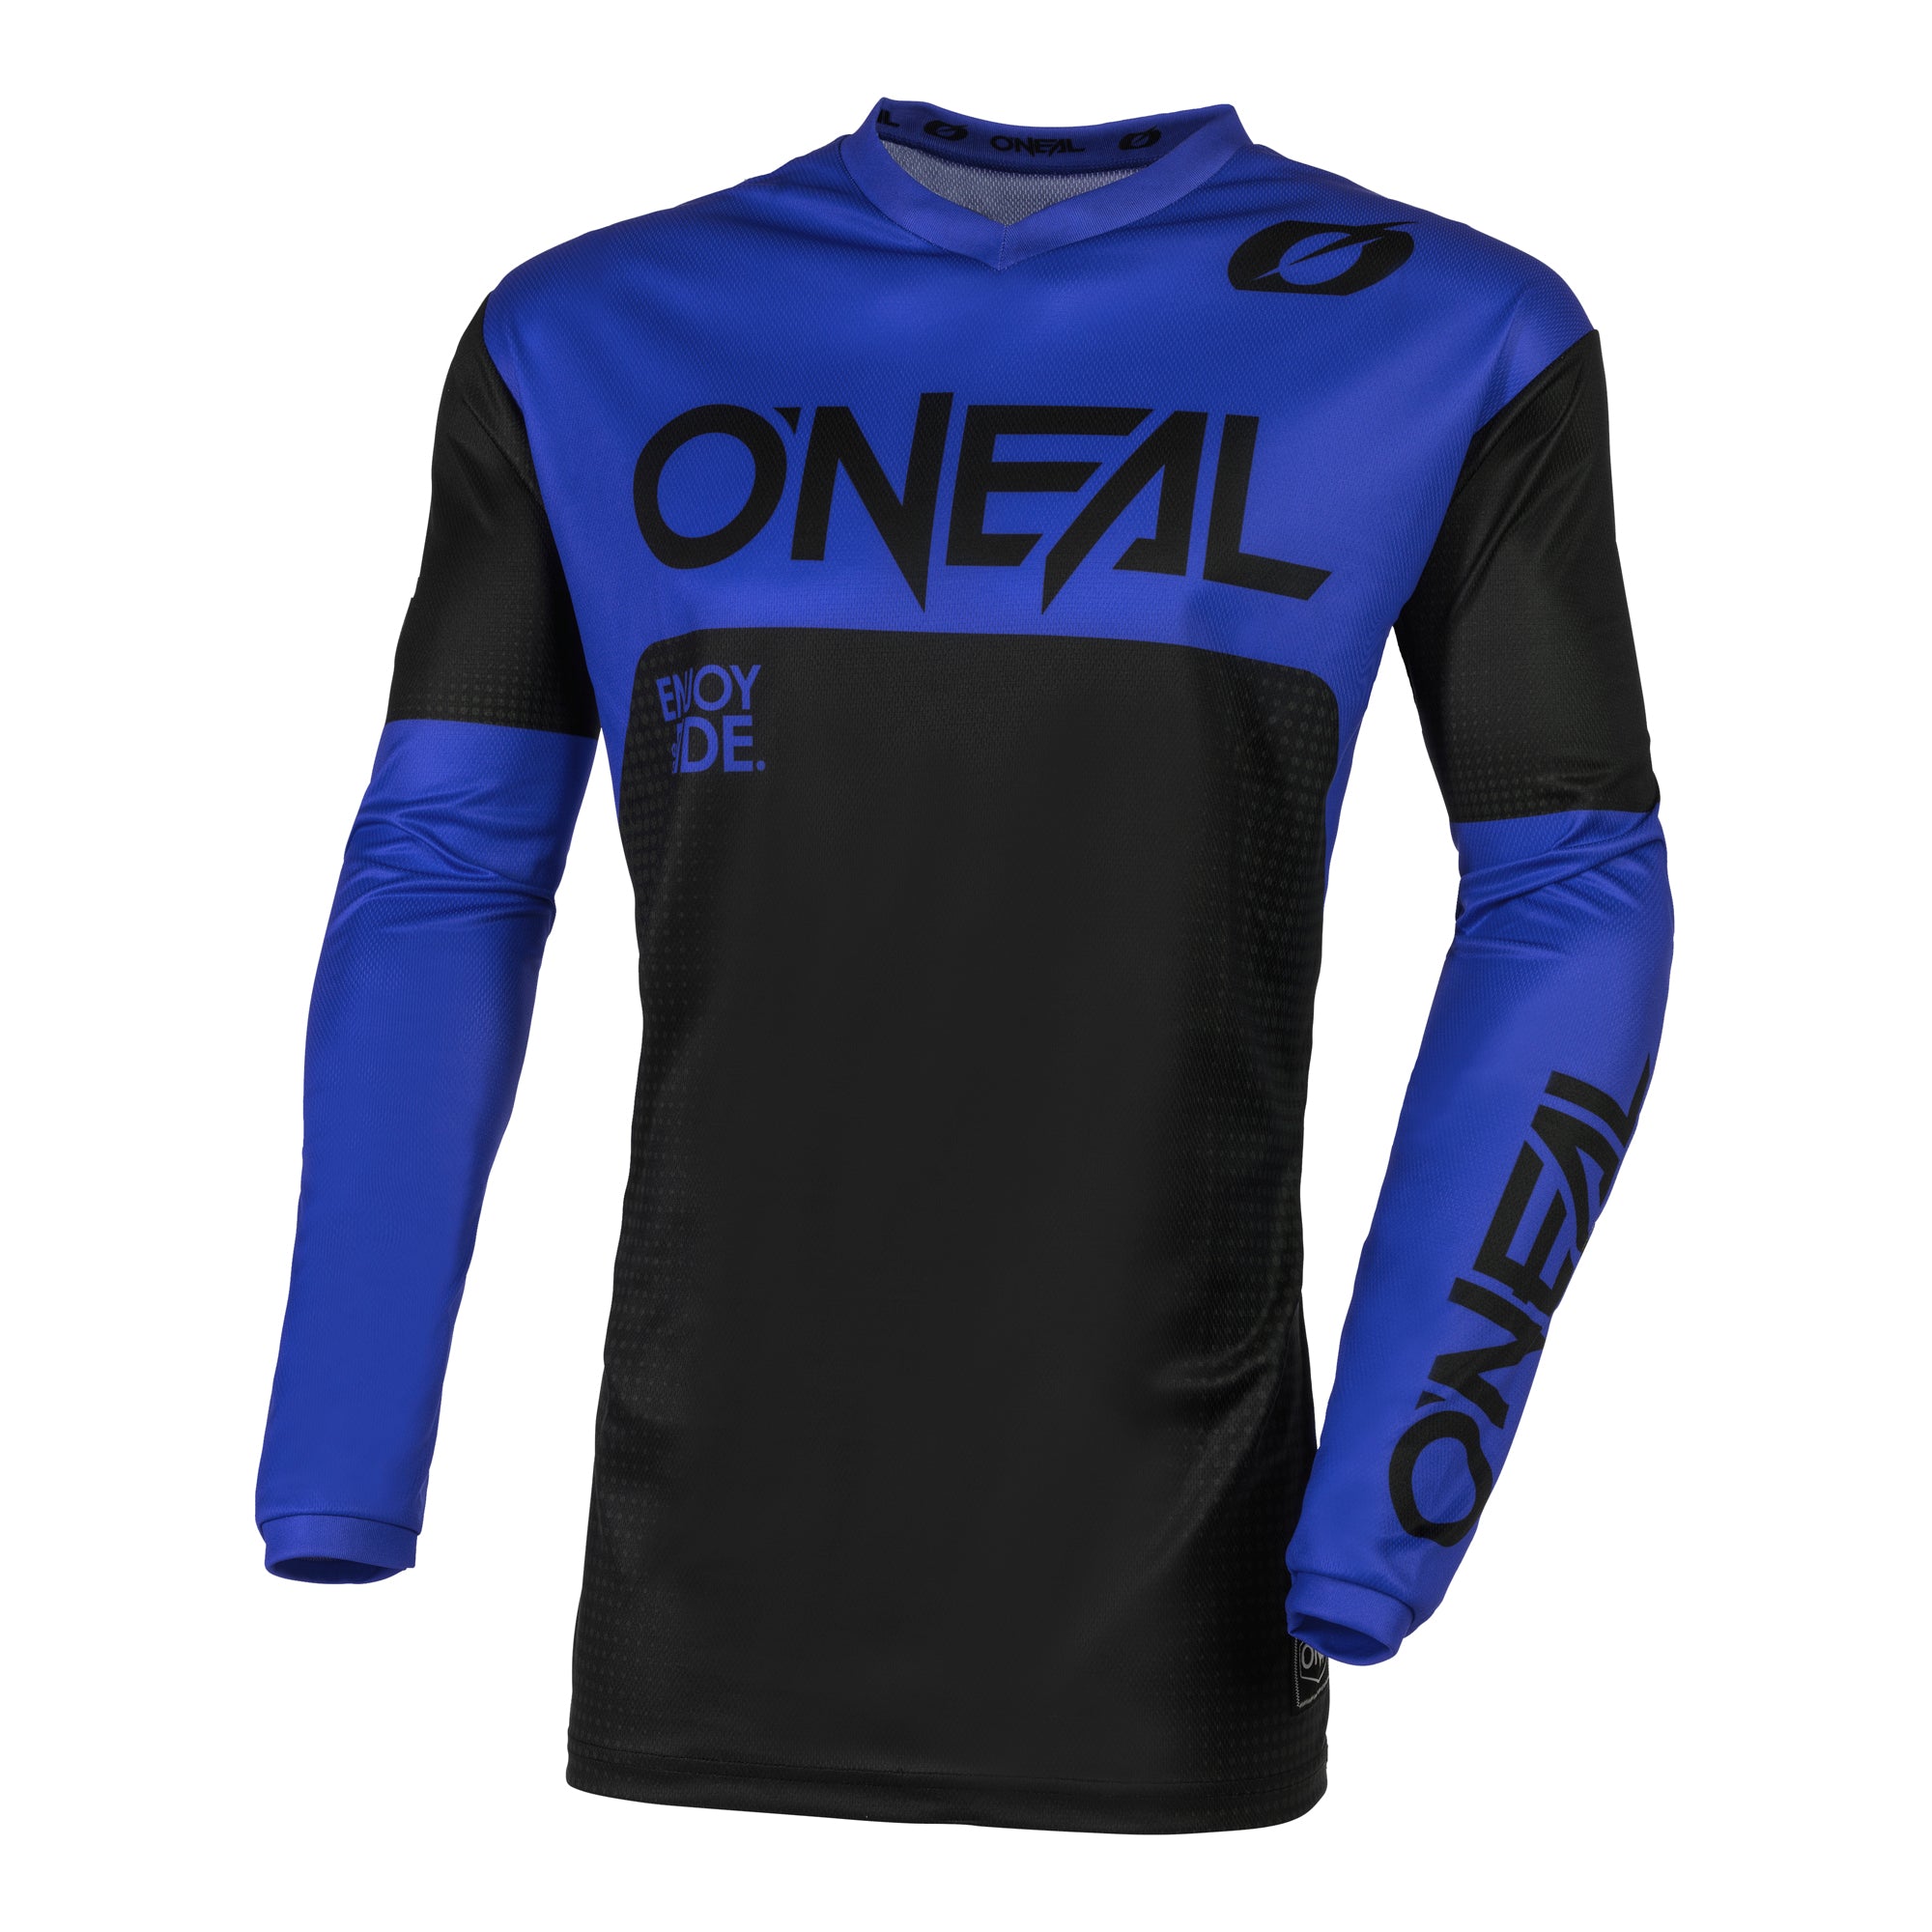 ELEMENT GEAR PAGE – ONEAL USA